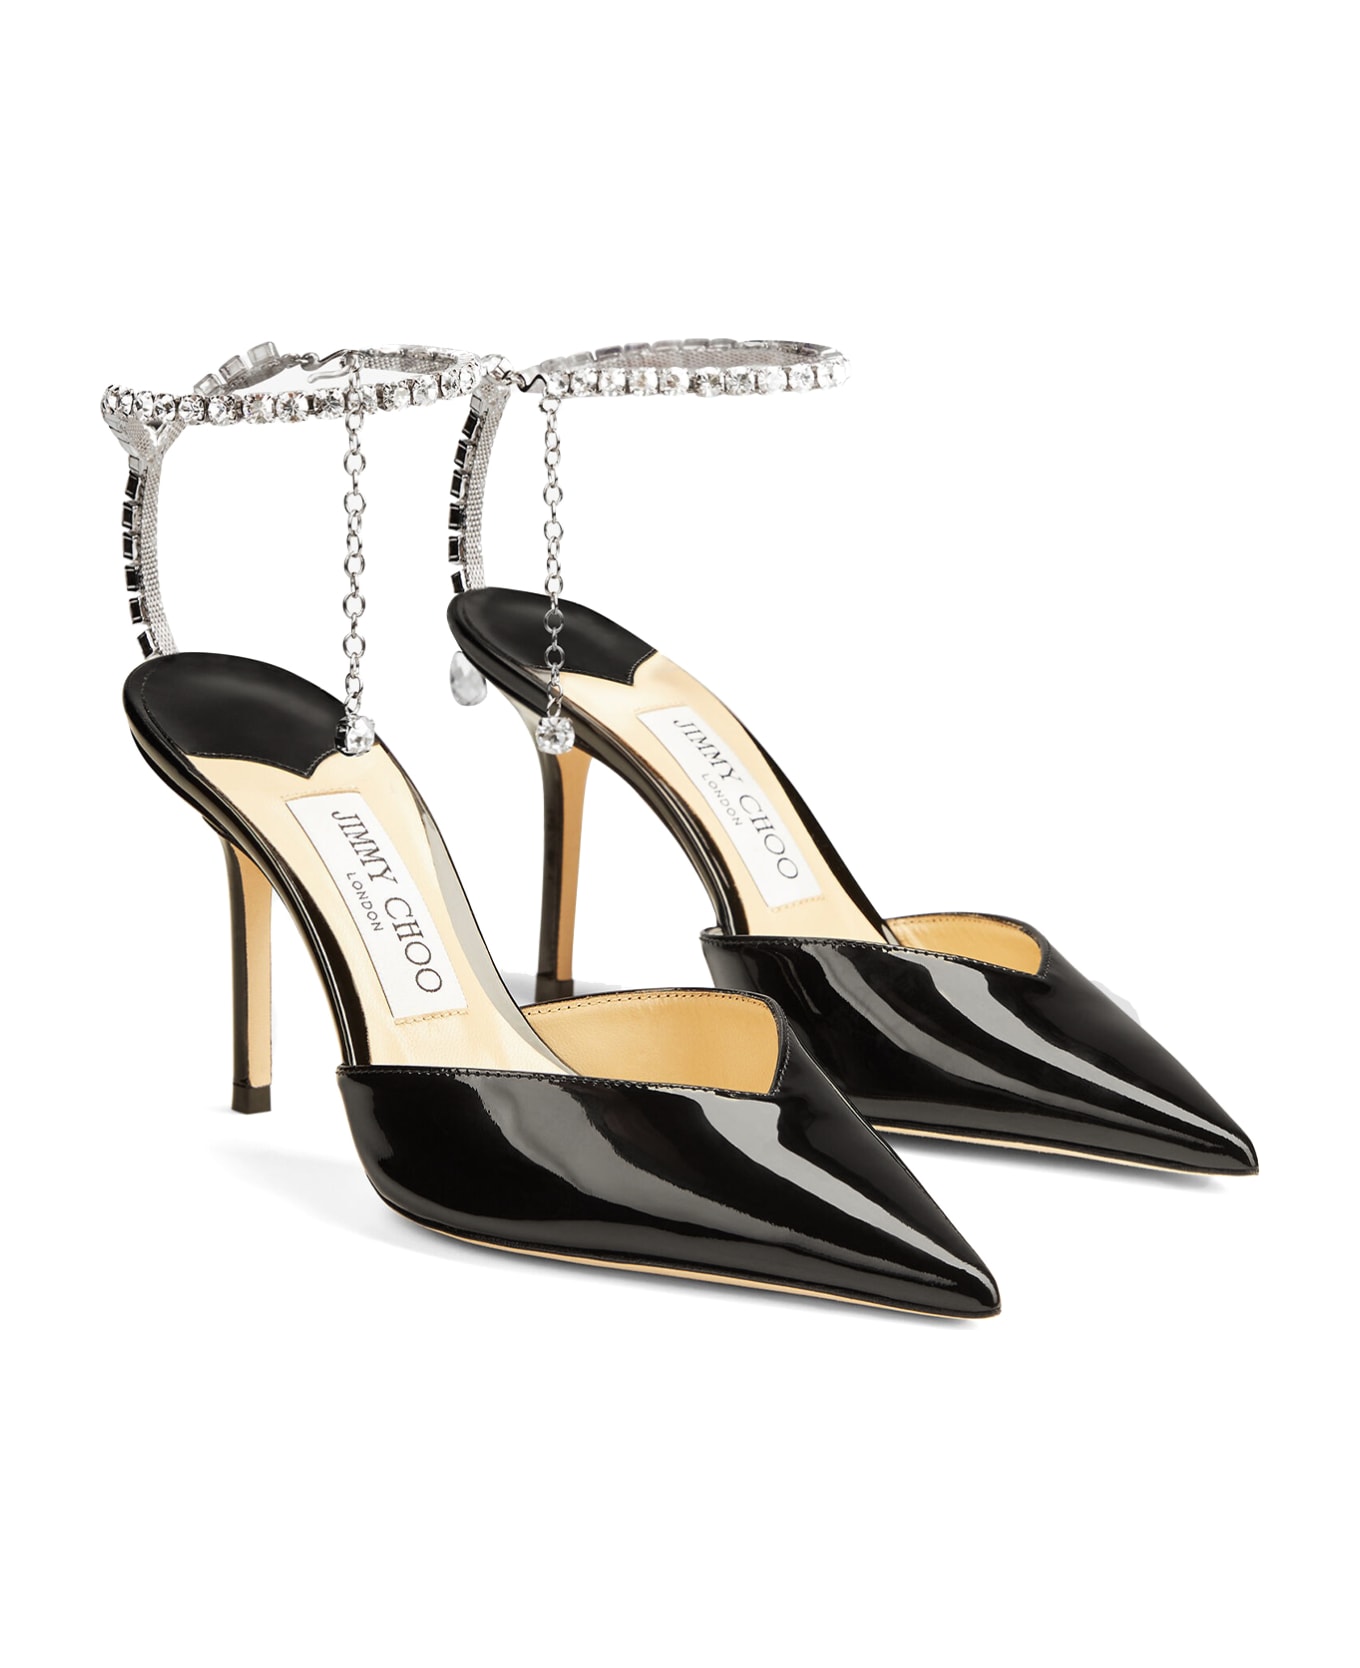 Jimmy Choo Black Patent Leather Pumps With Crystals - BLACK CRYSTAL